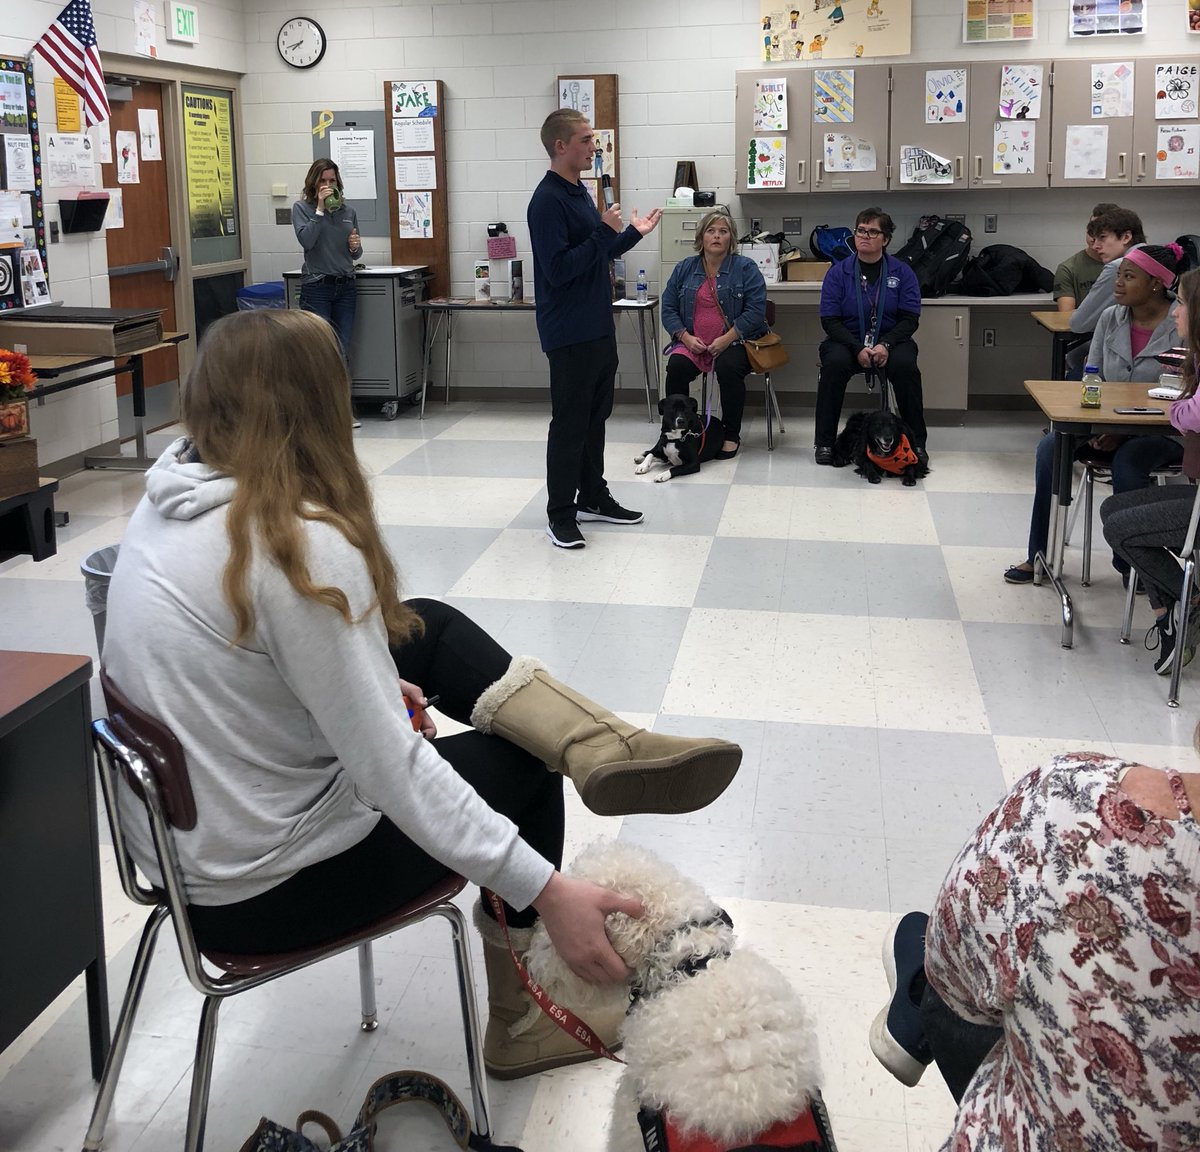 Proud to have AHS Alumni @TraskAngell (class of ‘17) here today. He founded the Latern Program to increase mental health awareness w/ youth. He partners w/ K9s from Carrie & Therapy Dogs International to Pet Away Worry & Stress (PAWS). #HuskyPride #HuskyPAWS #Together #HuskiesHS